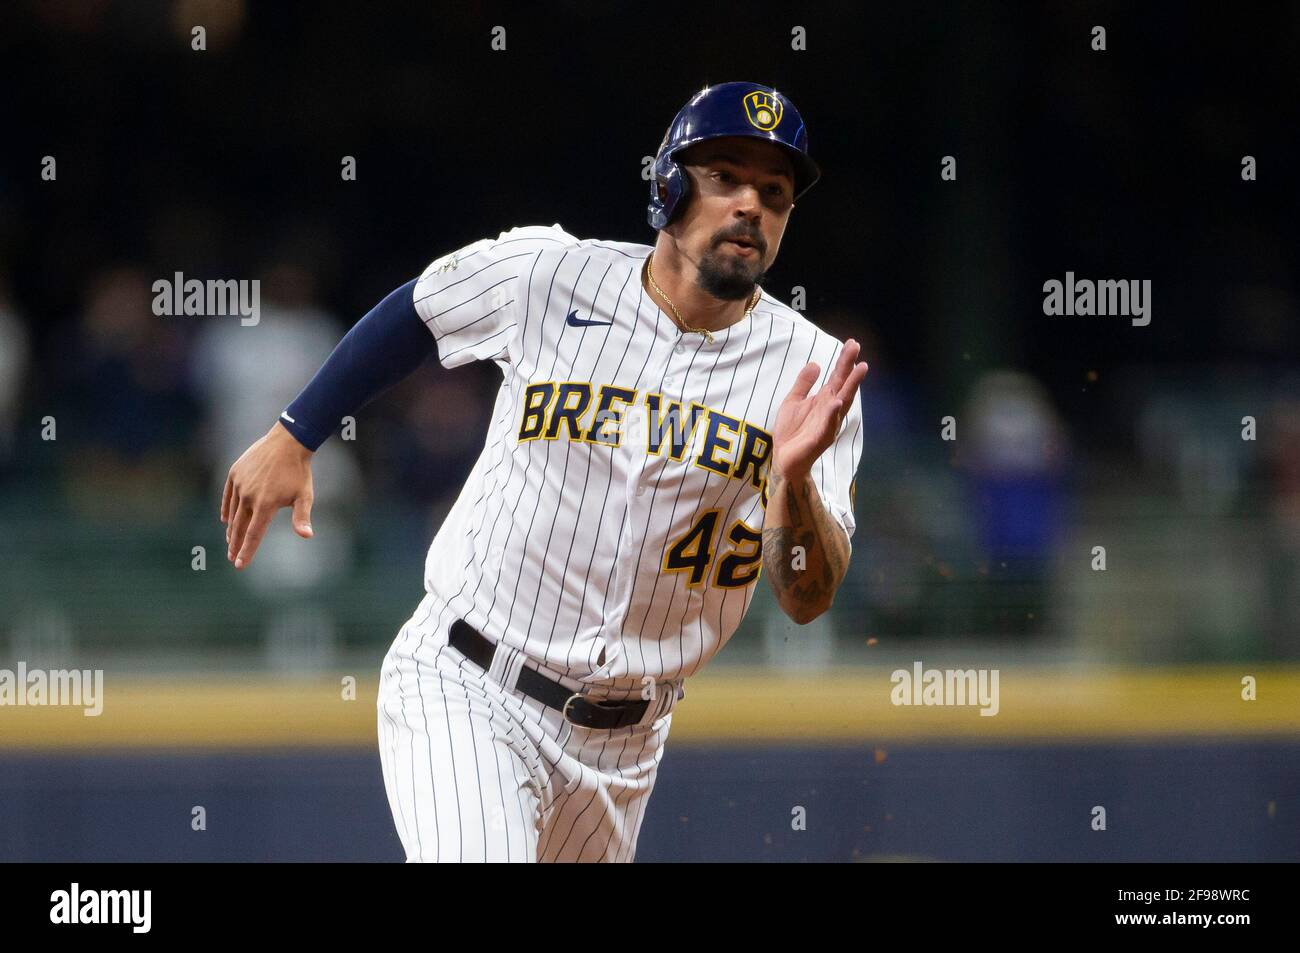 April 16, 2021: Milwaukee Brewers Jace Peterson #14 races to the